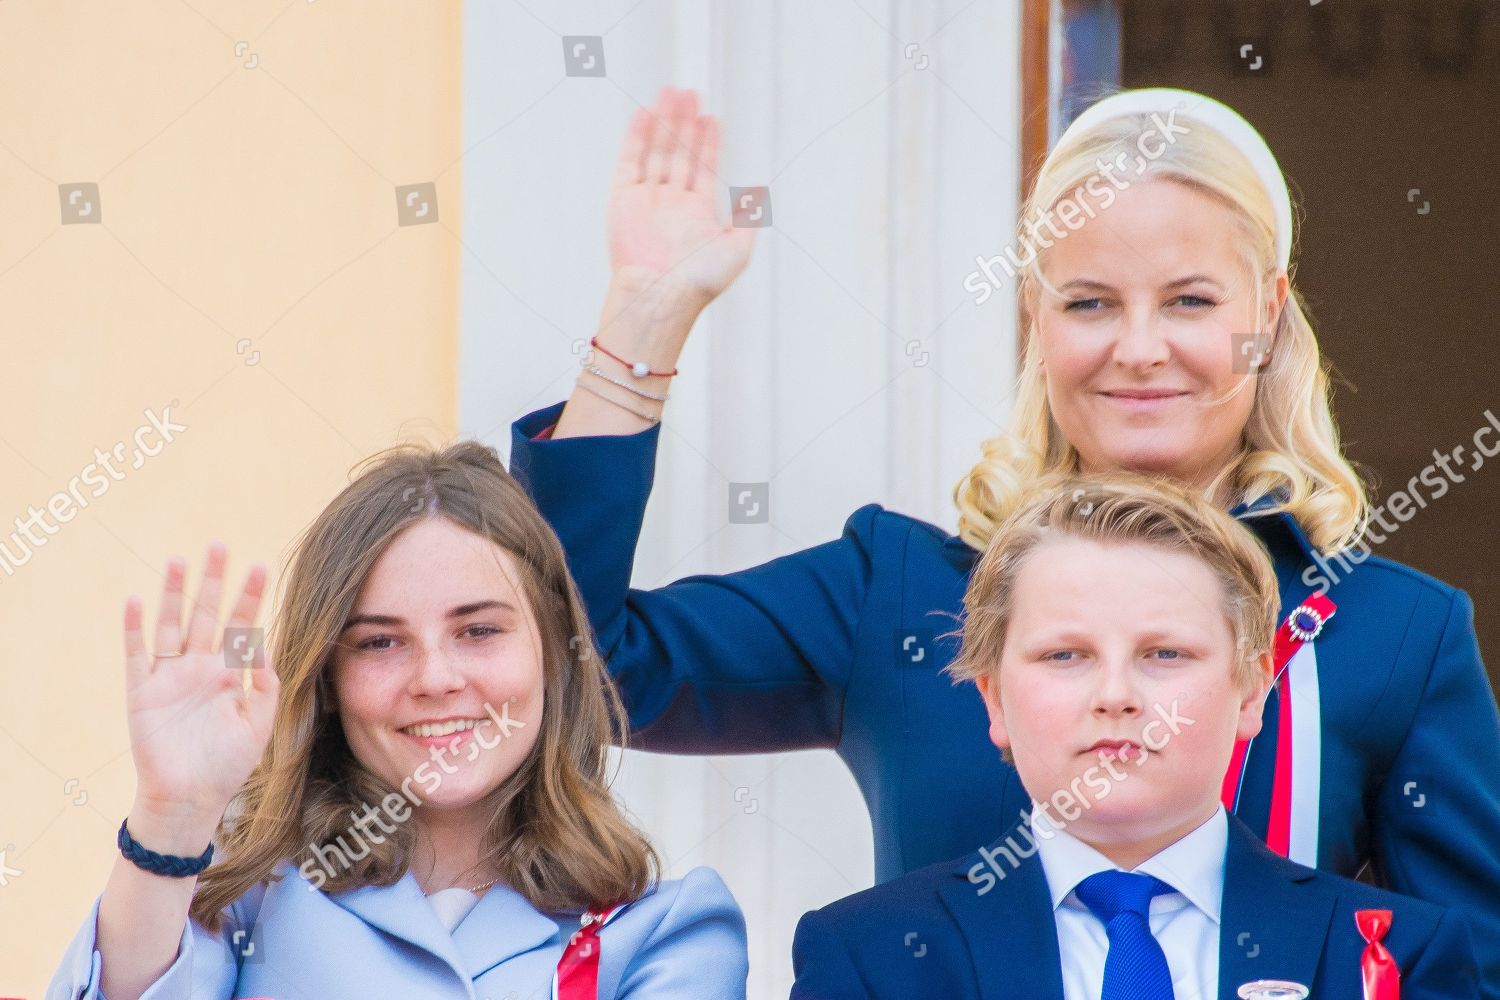 national-day-celebrations-the-royal-palace-oslo-norway-shutterstock-editorial-10239768q.jpg